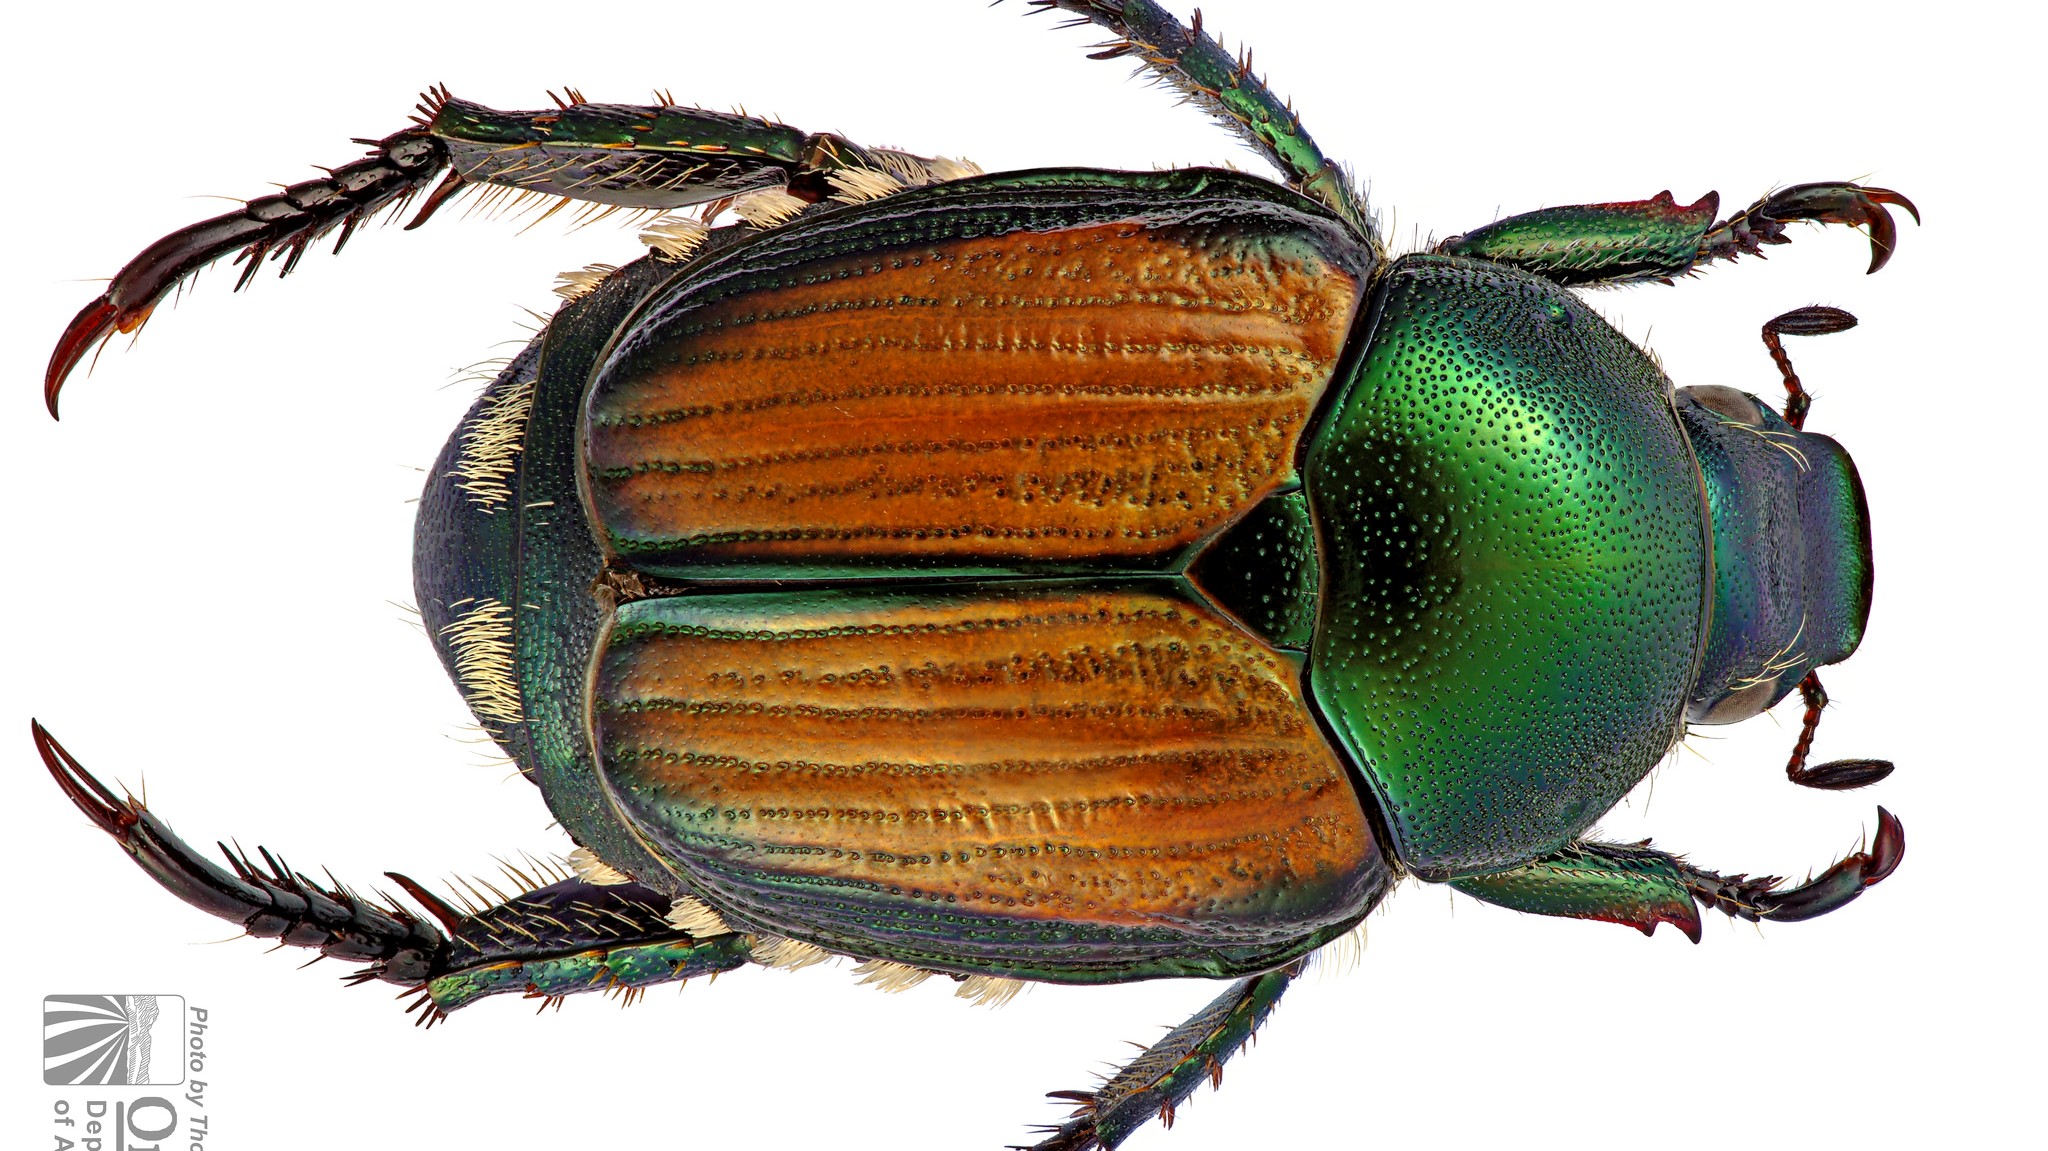 images of beetles